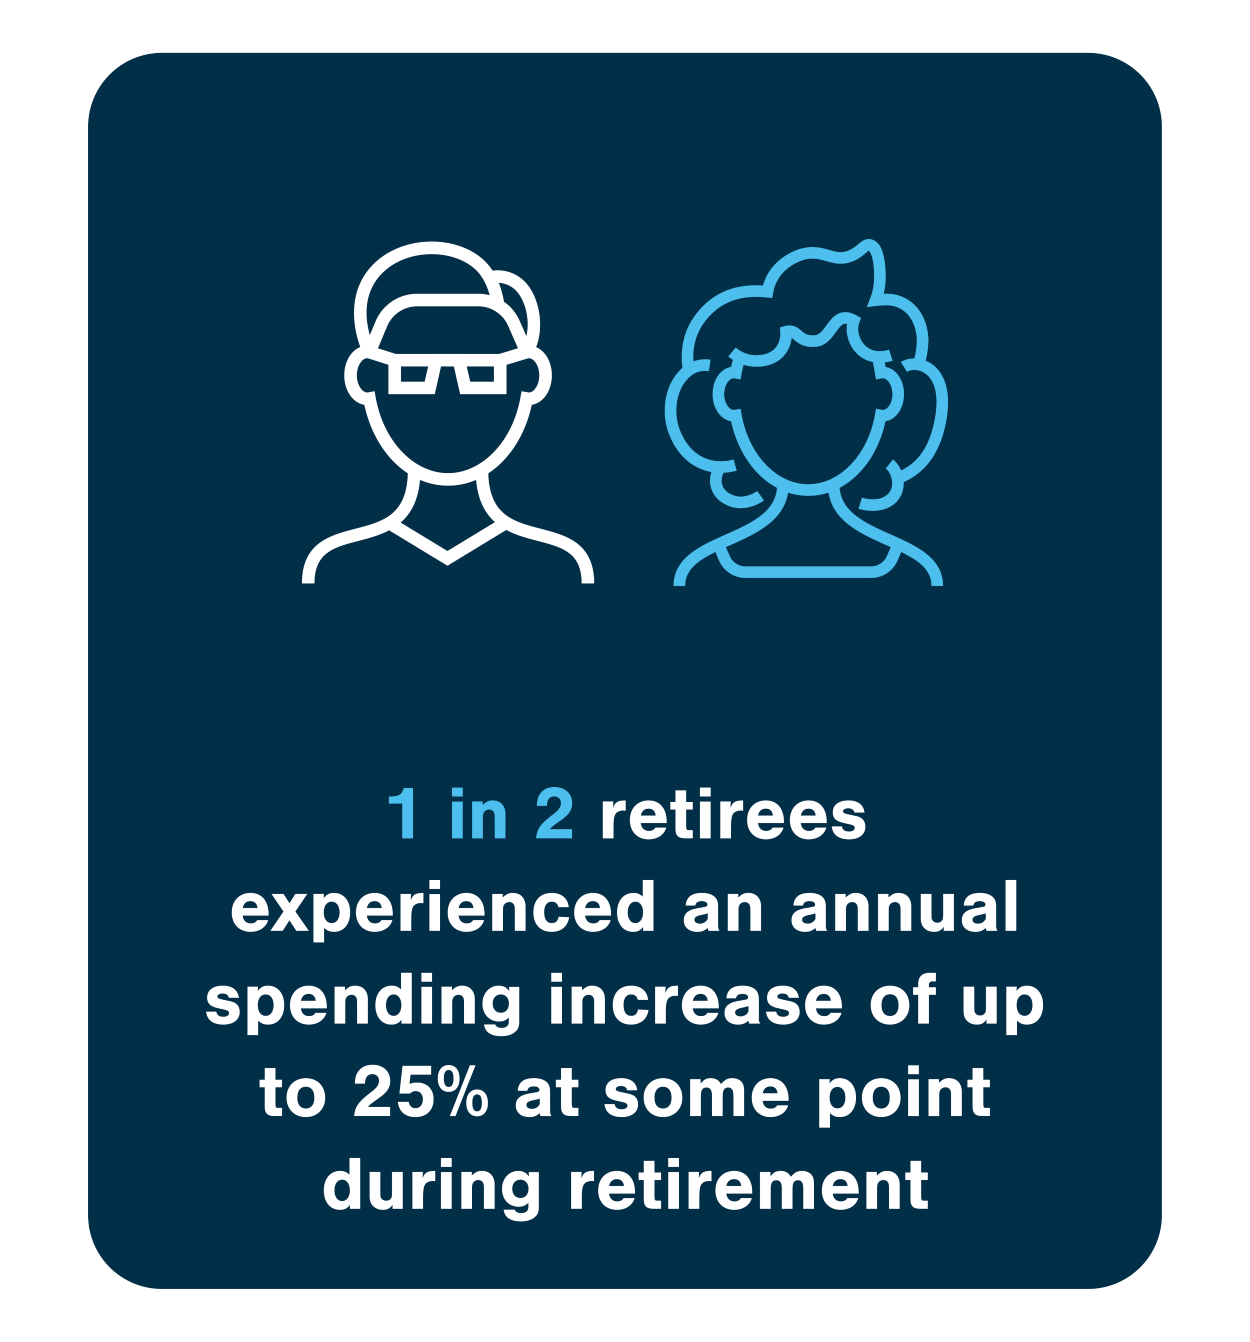 1 in 2 retirees experienced and annual spending increase of up to 25% at some point during retirement.